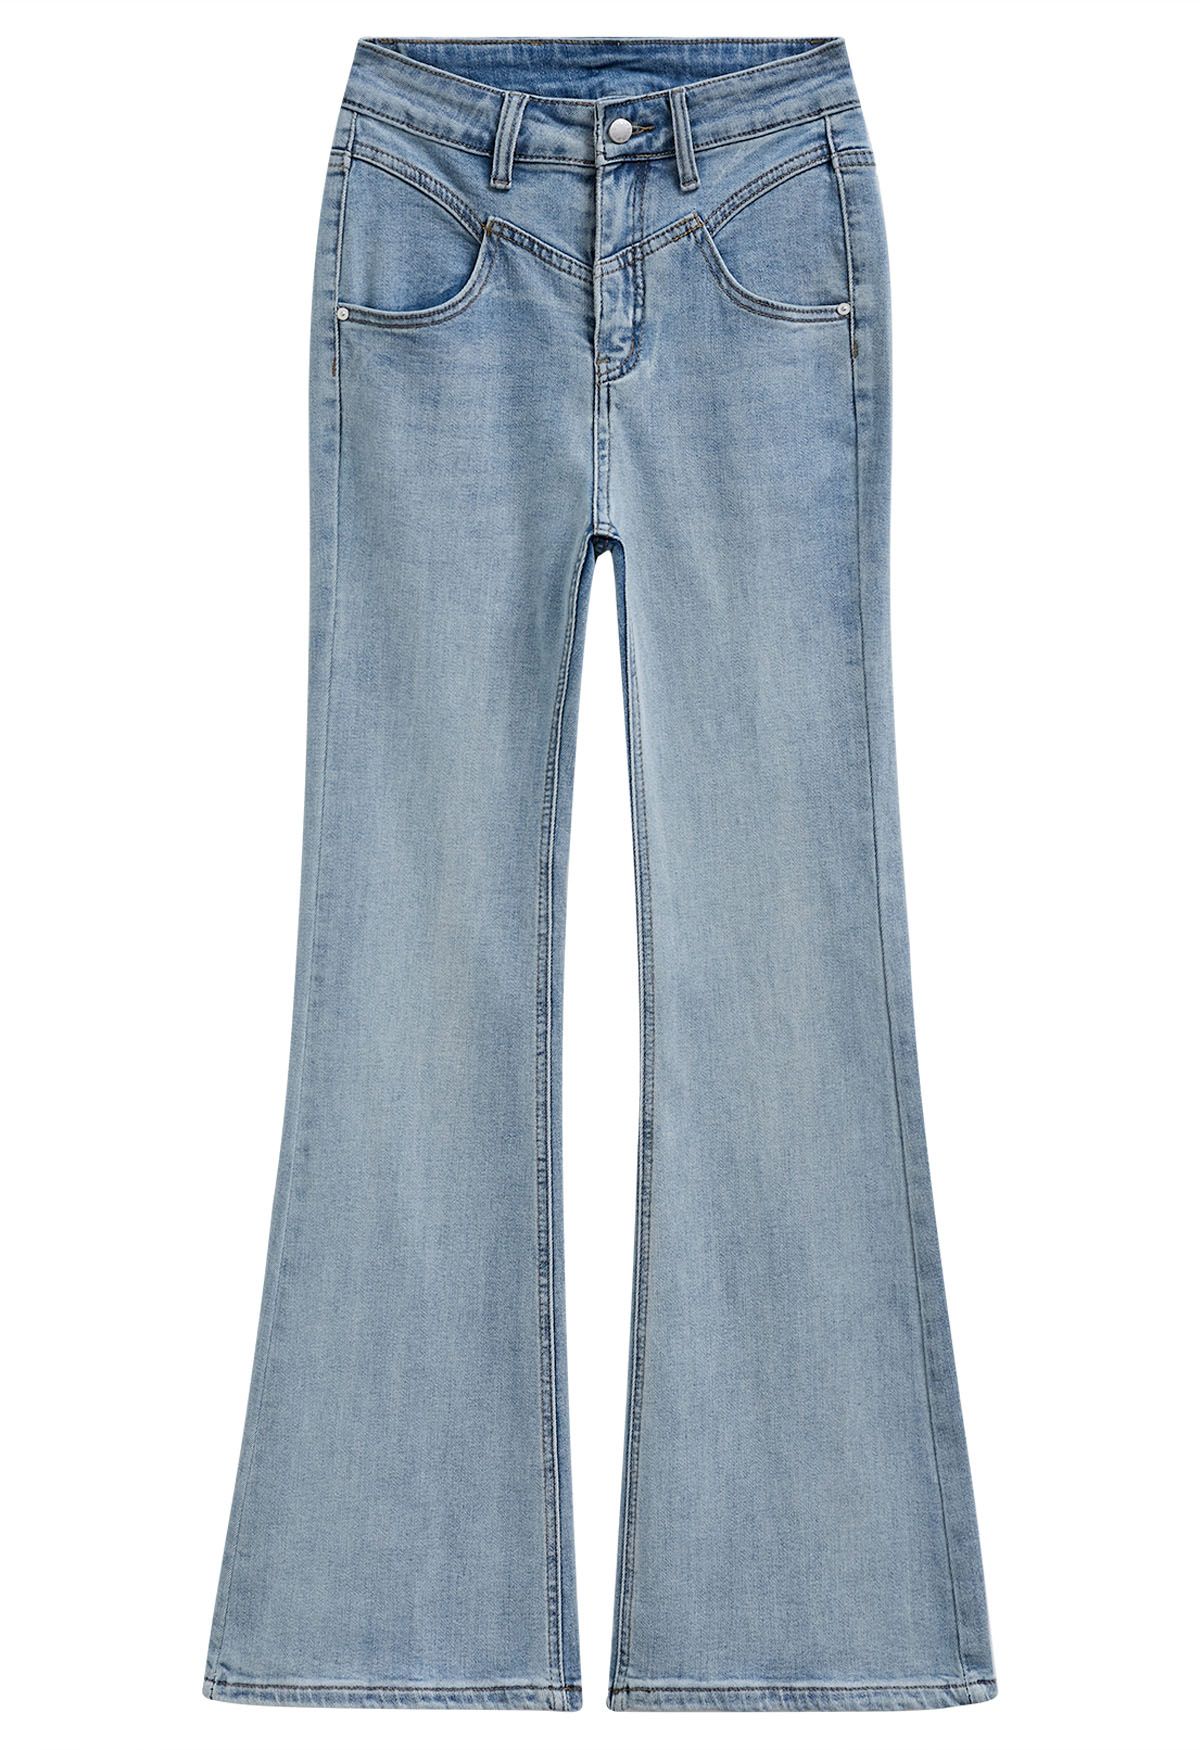 Flattering Stretchy Flare Leg Jeans in Blue